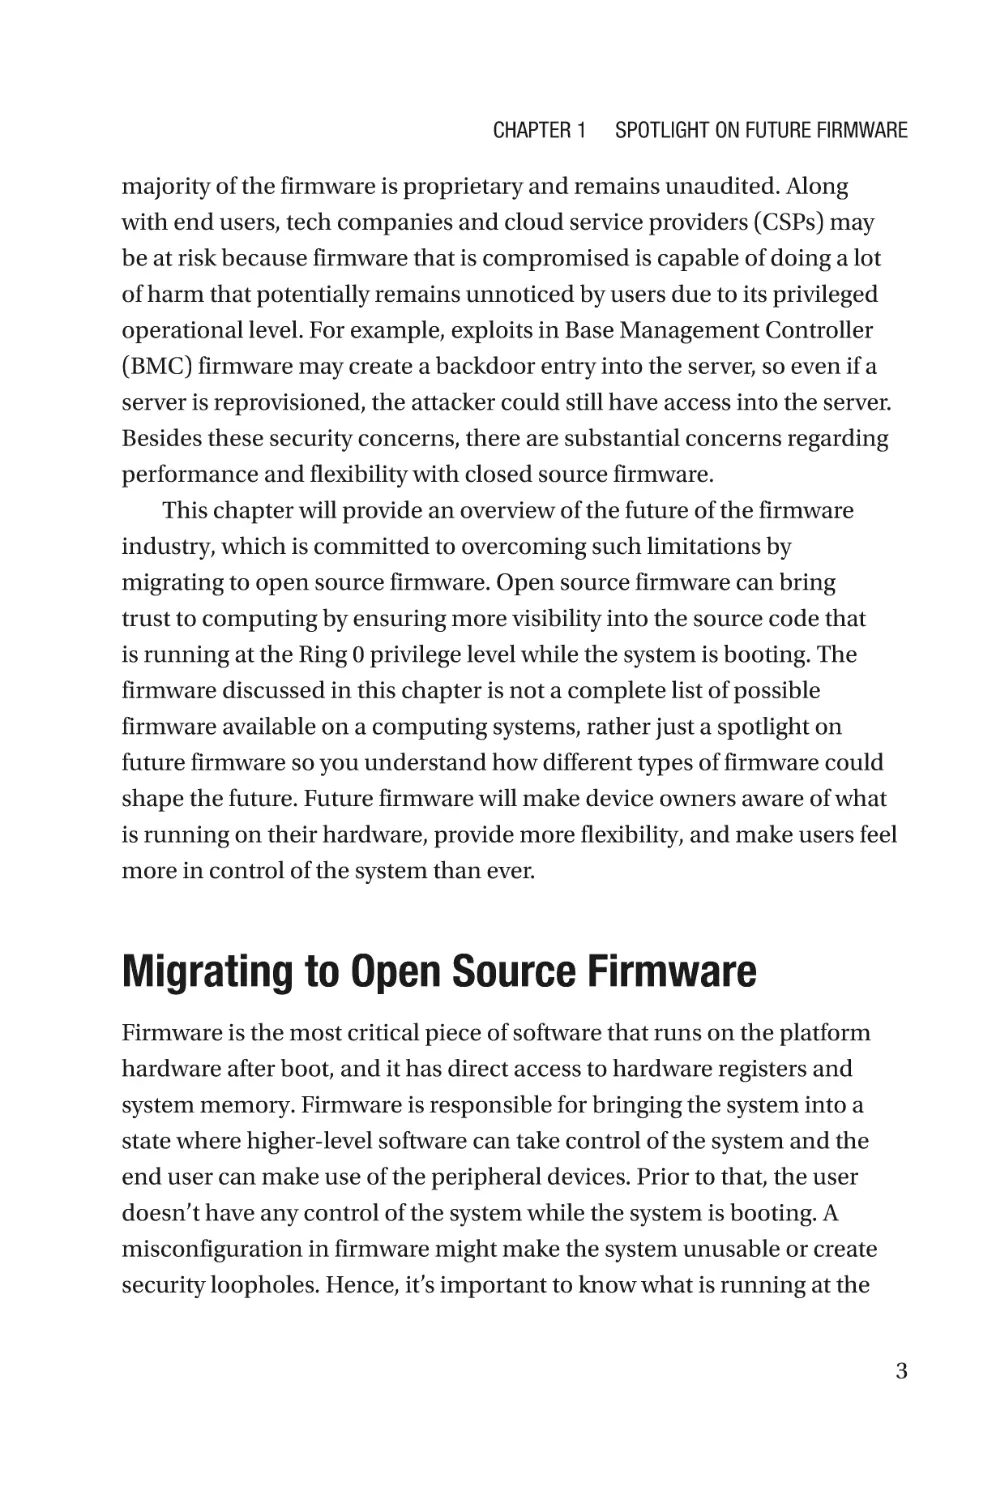 Migrating to Open Source Firmware